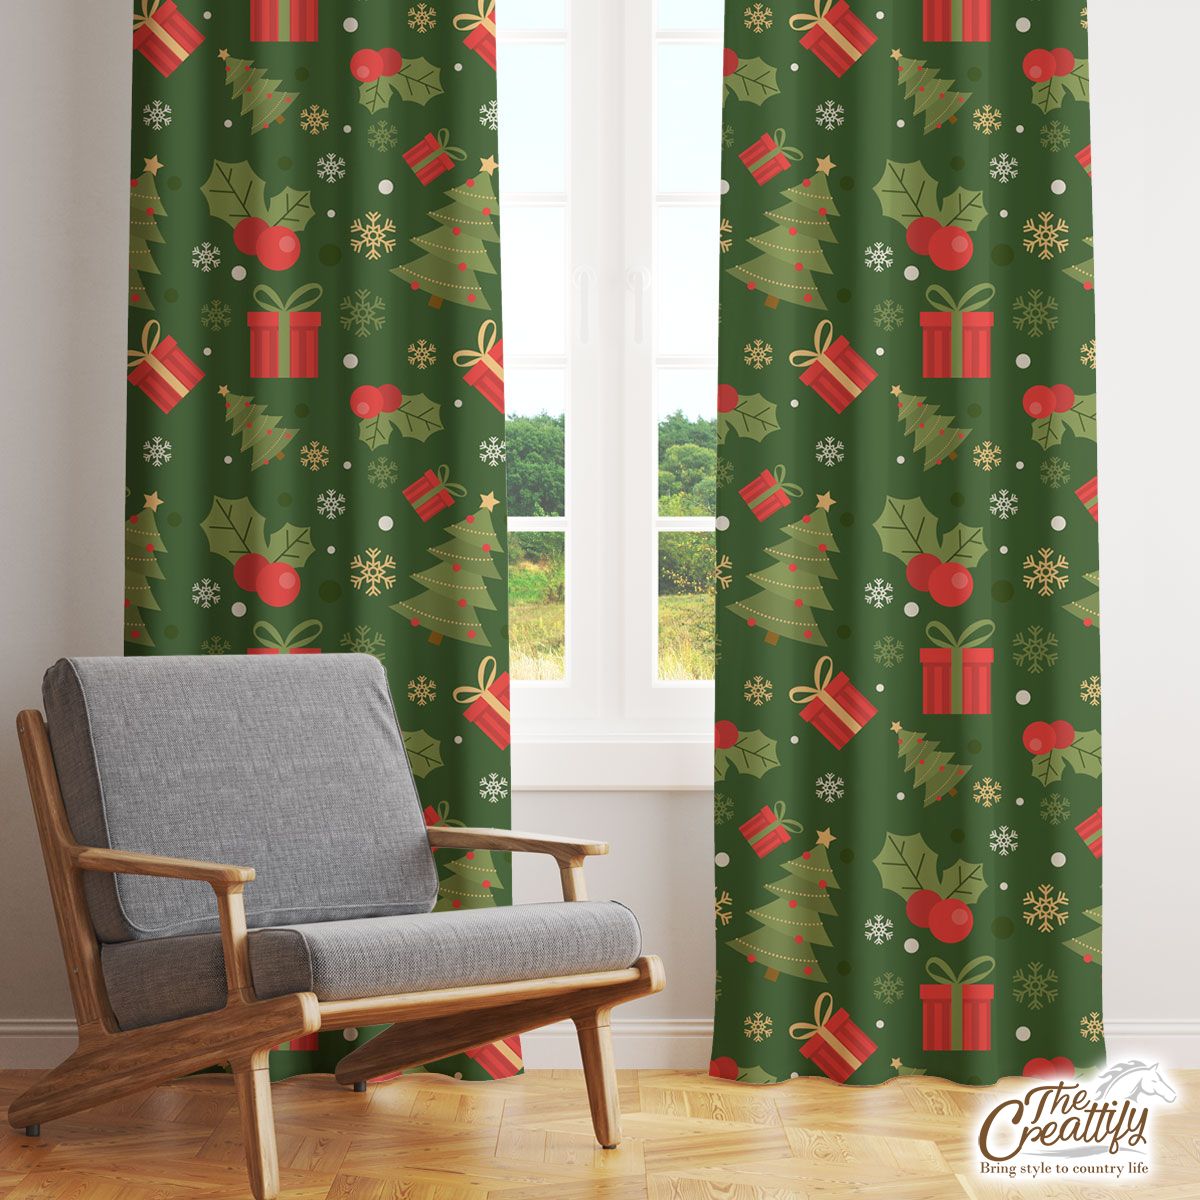 Christmas Tree With Holly Leaf And Presents Window Curtain